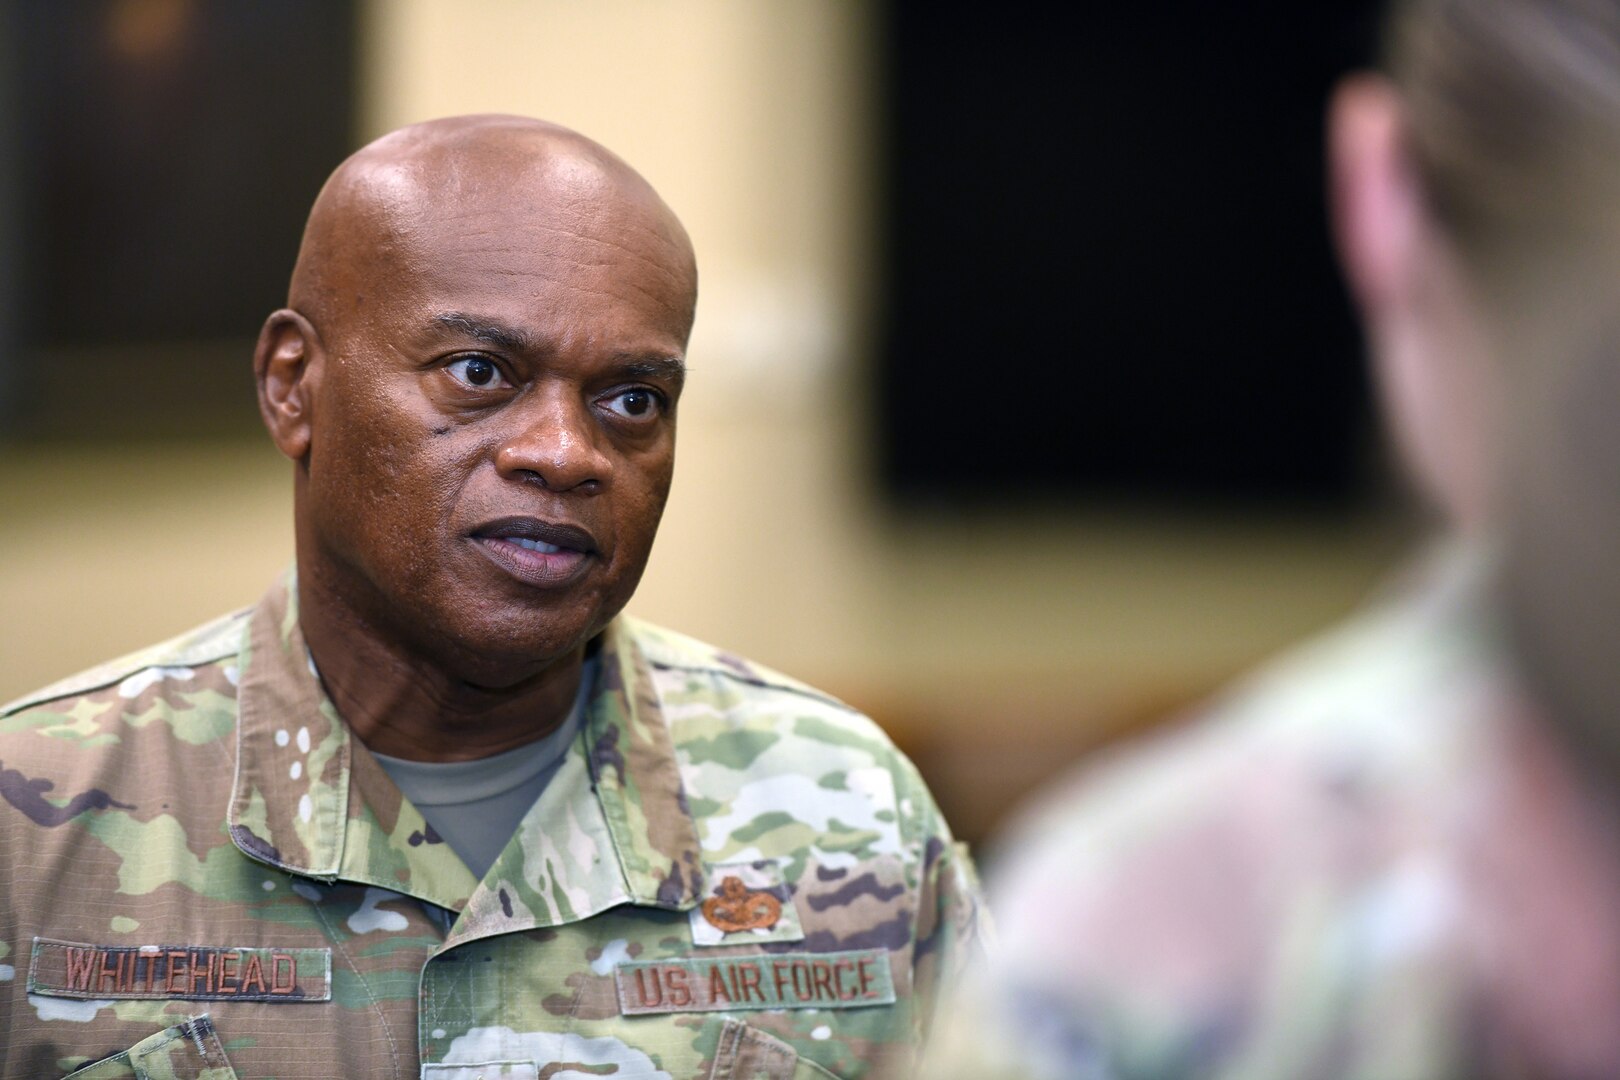 Senior Enlisted Advisor Tony Whitehead, the SEA for the chief of the National Guard Bureau, talks to an Airman with the Missouri Air National Guard’s 131st Bomb Wing at Whiteman Air Force Base, Missouri, Aug. 30, 2022. Whitehead was touring National Guard facilities at Whiteman and participating as a guest speaker in a panel discussing women’s equality.